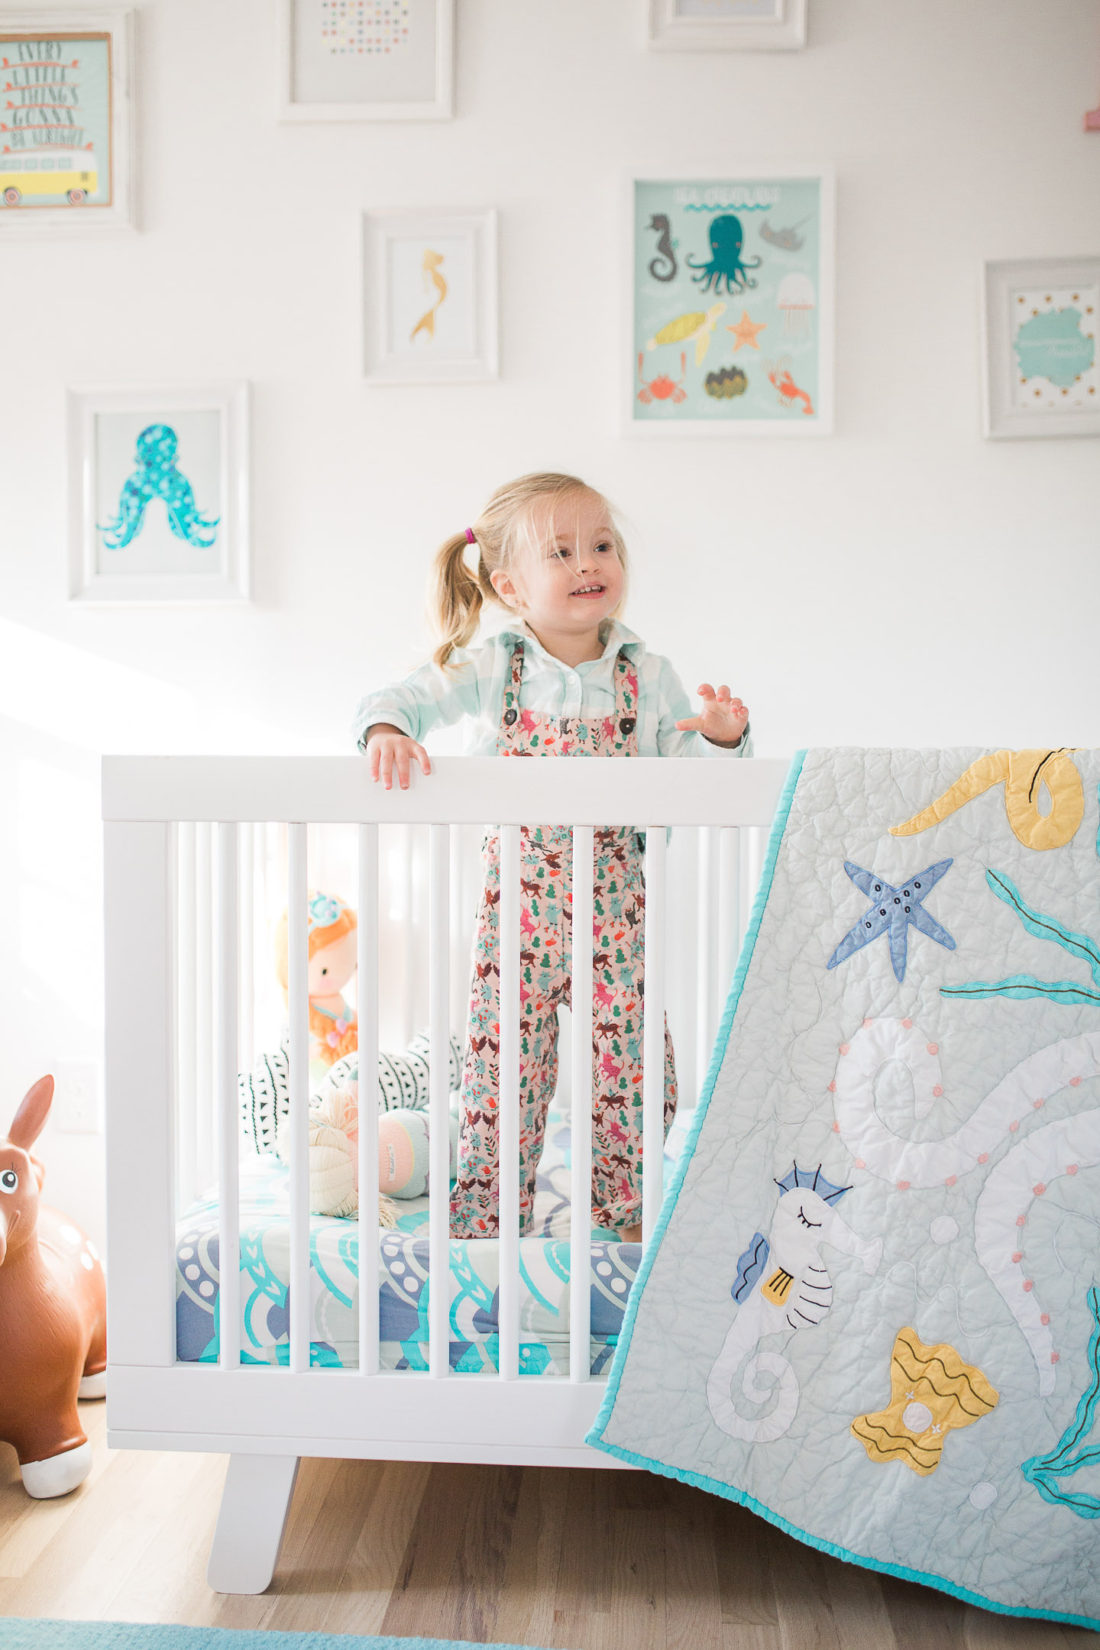 Marlowe Martino pictured in her mermaid inspired bedroom in her home in Connecticut designed by mother Eva Amurri Martino of lifestyle and motherhood blog Happily Eva After